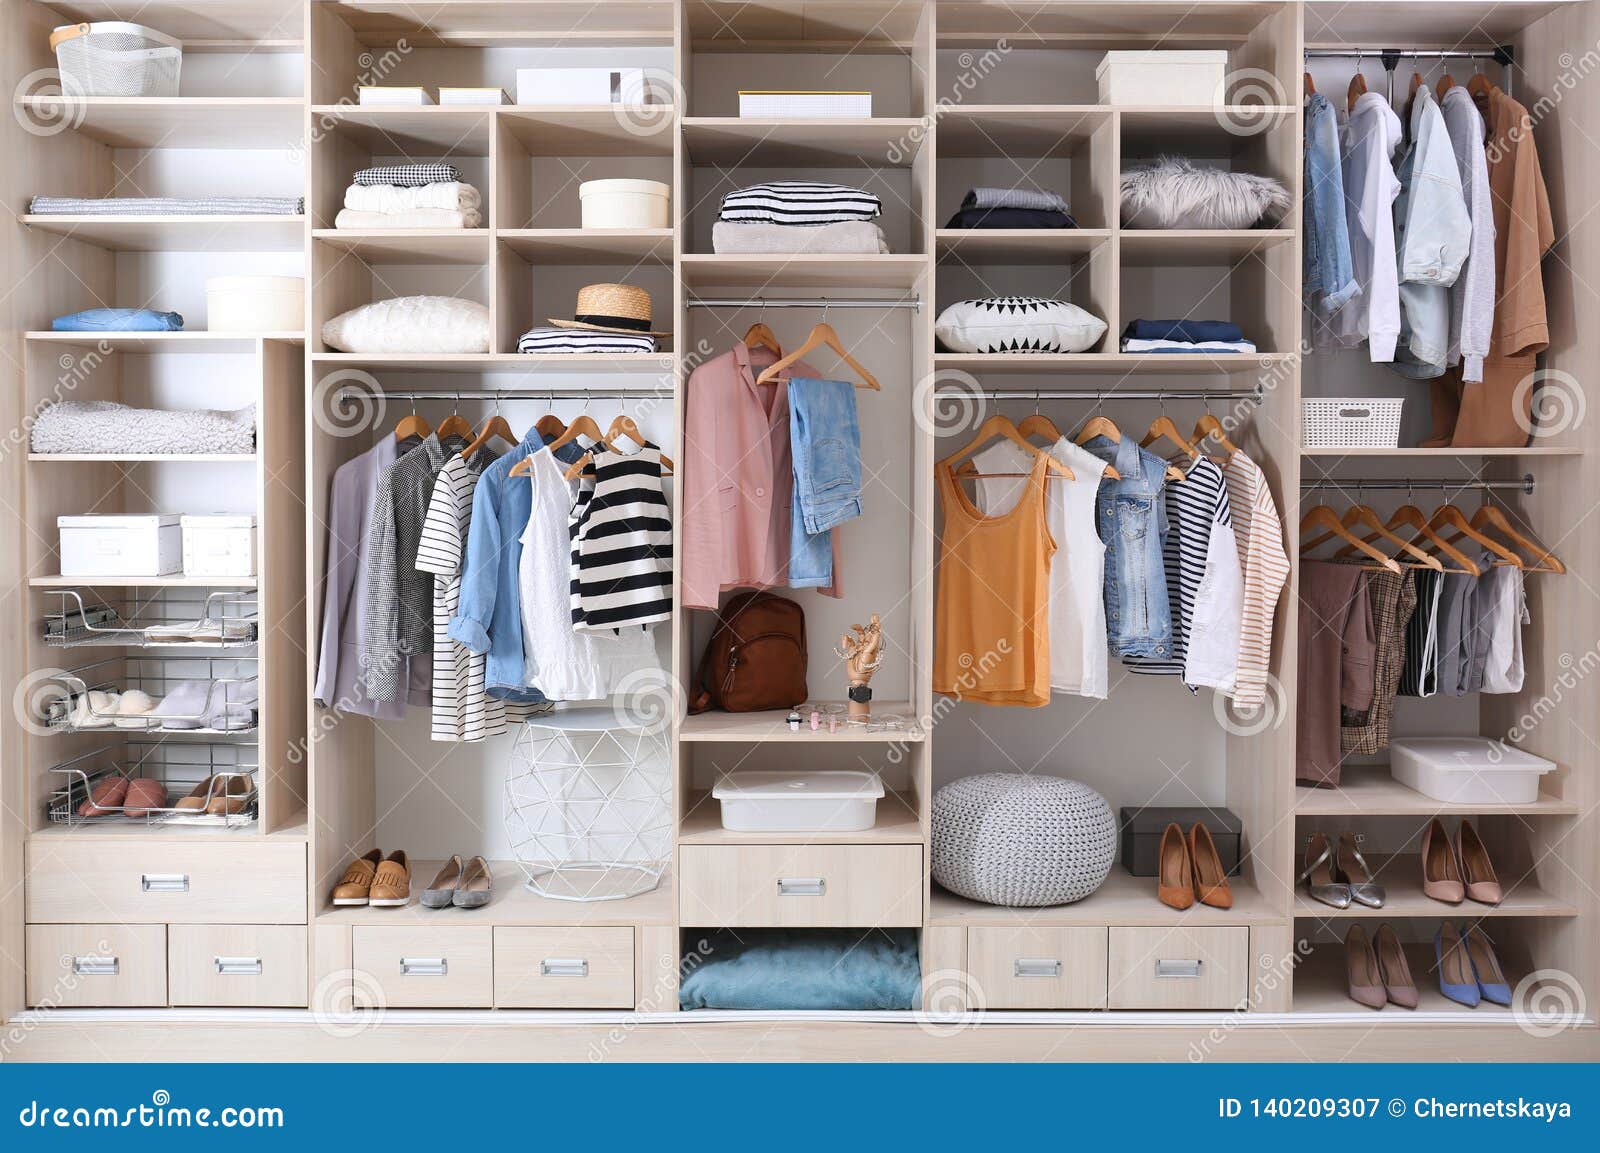 stylish clothes, shoes and home stuff in large wardrobe